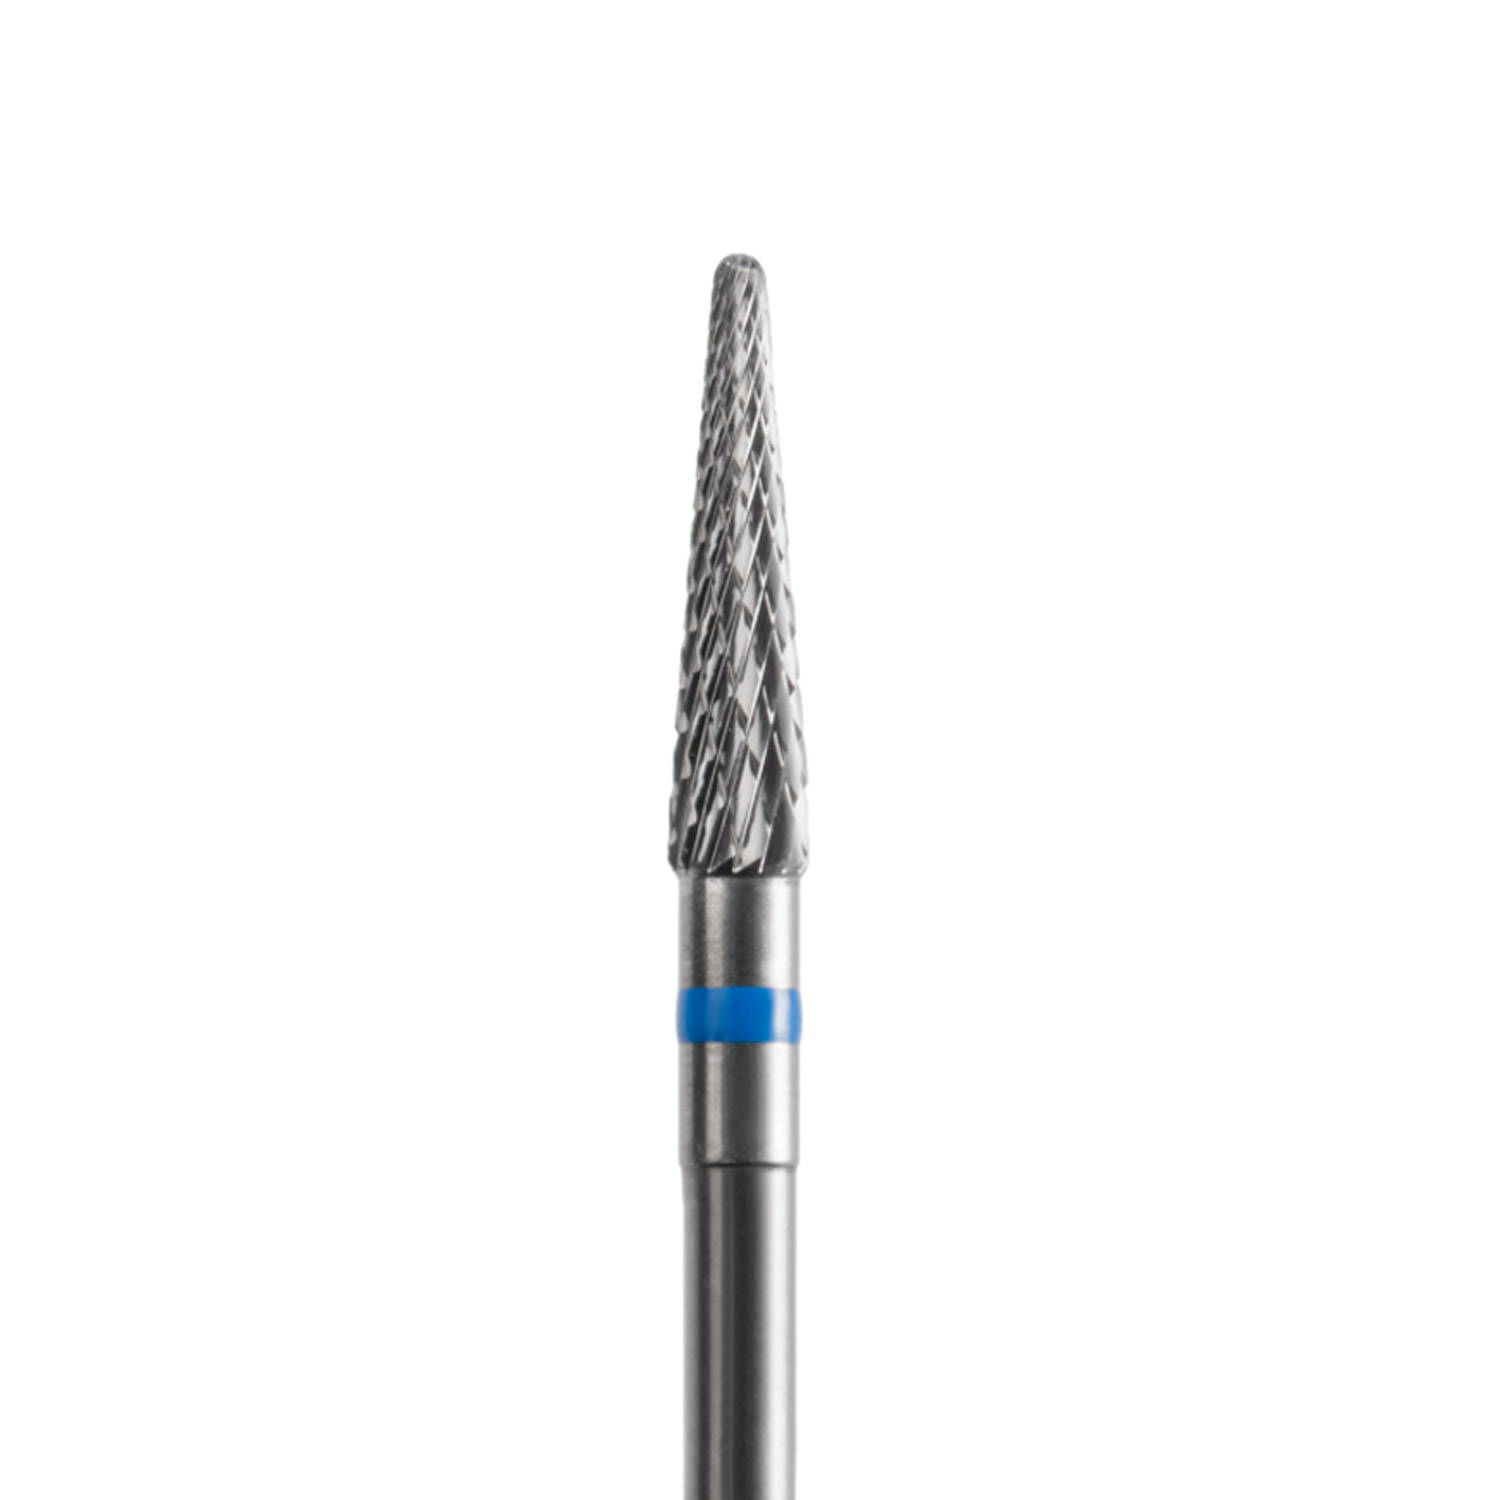 Acurata professional milling tool with moderate cross cut AC-61 ACURATA - 190 Series - Gel Removal